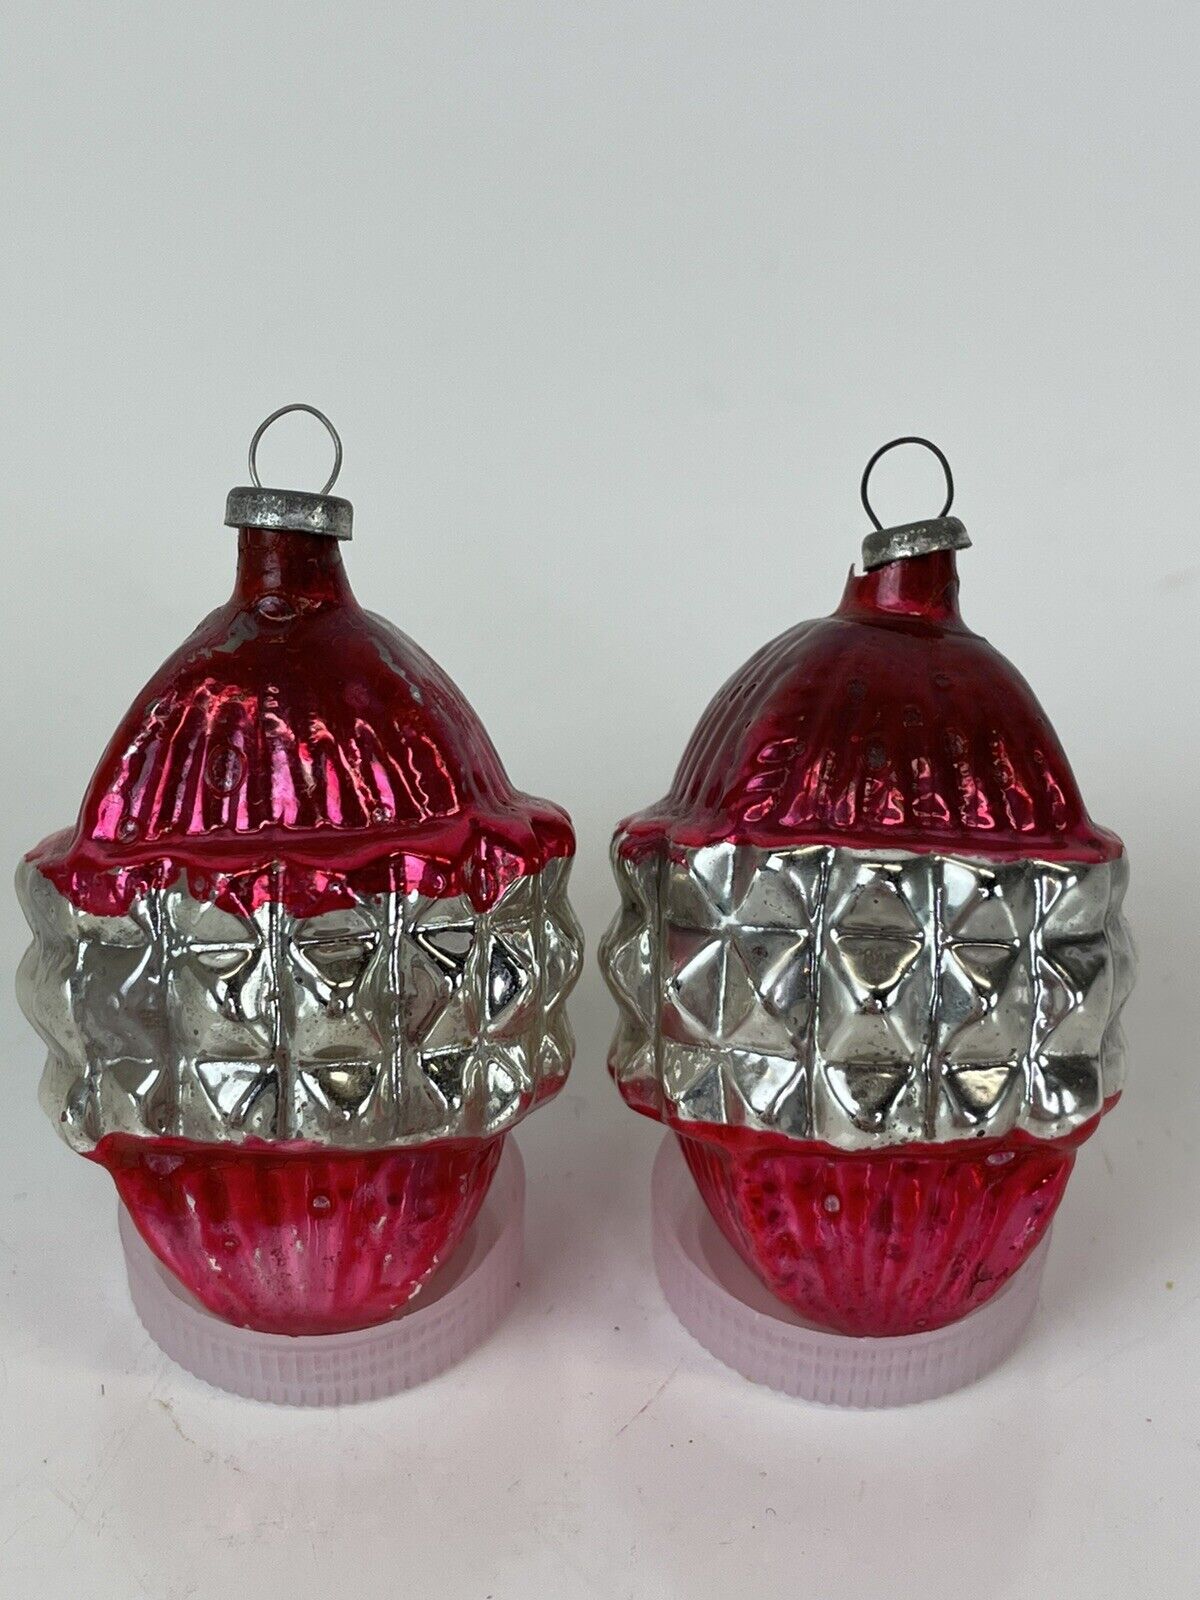 Vintage Lot of 2 Red and Silver  Mercury Glass Christmas Ornament Lantern 2”